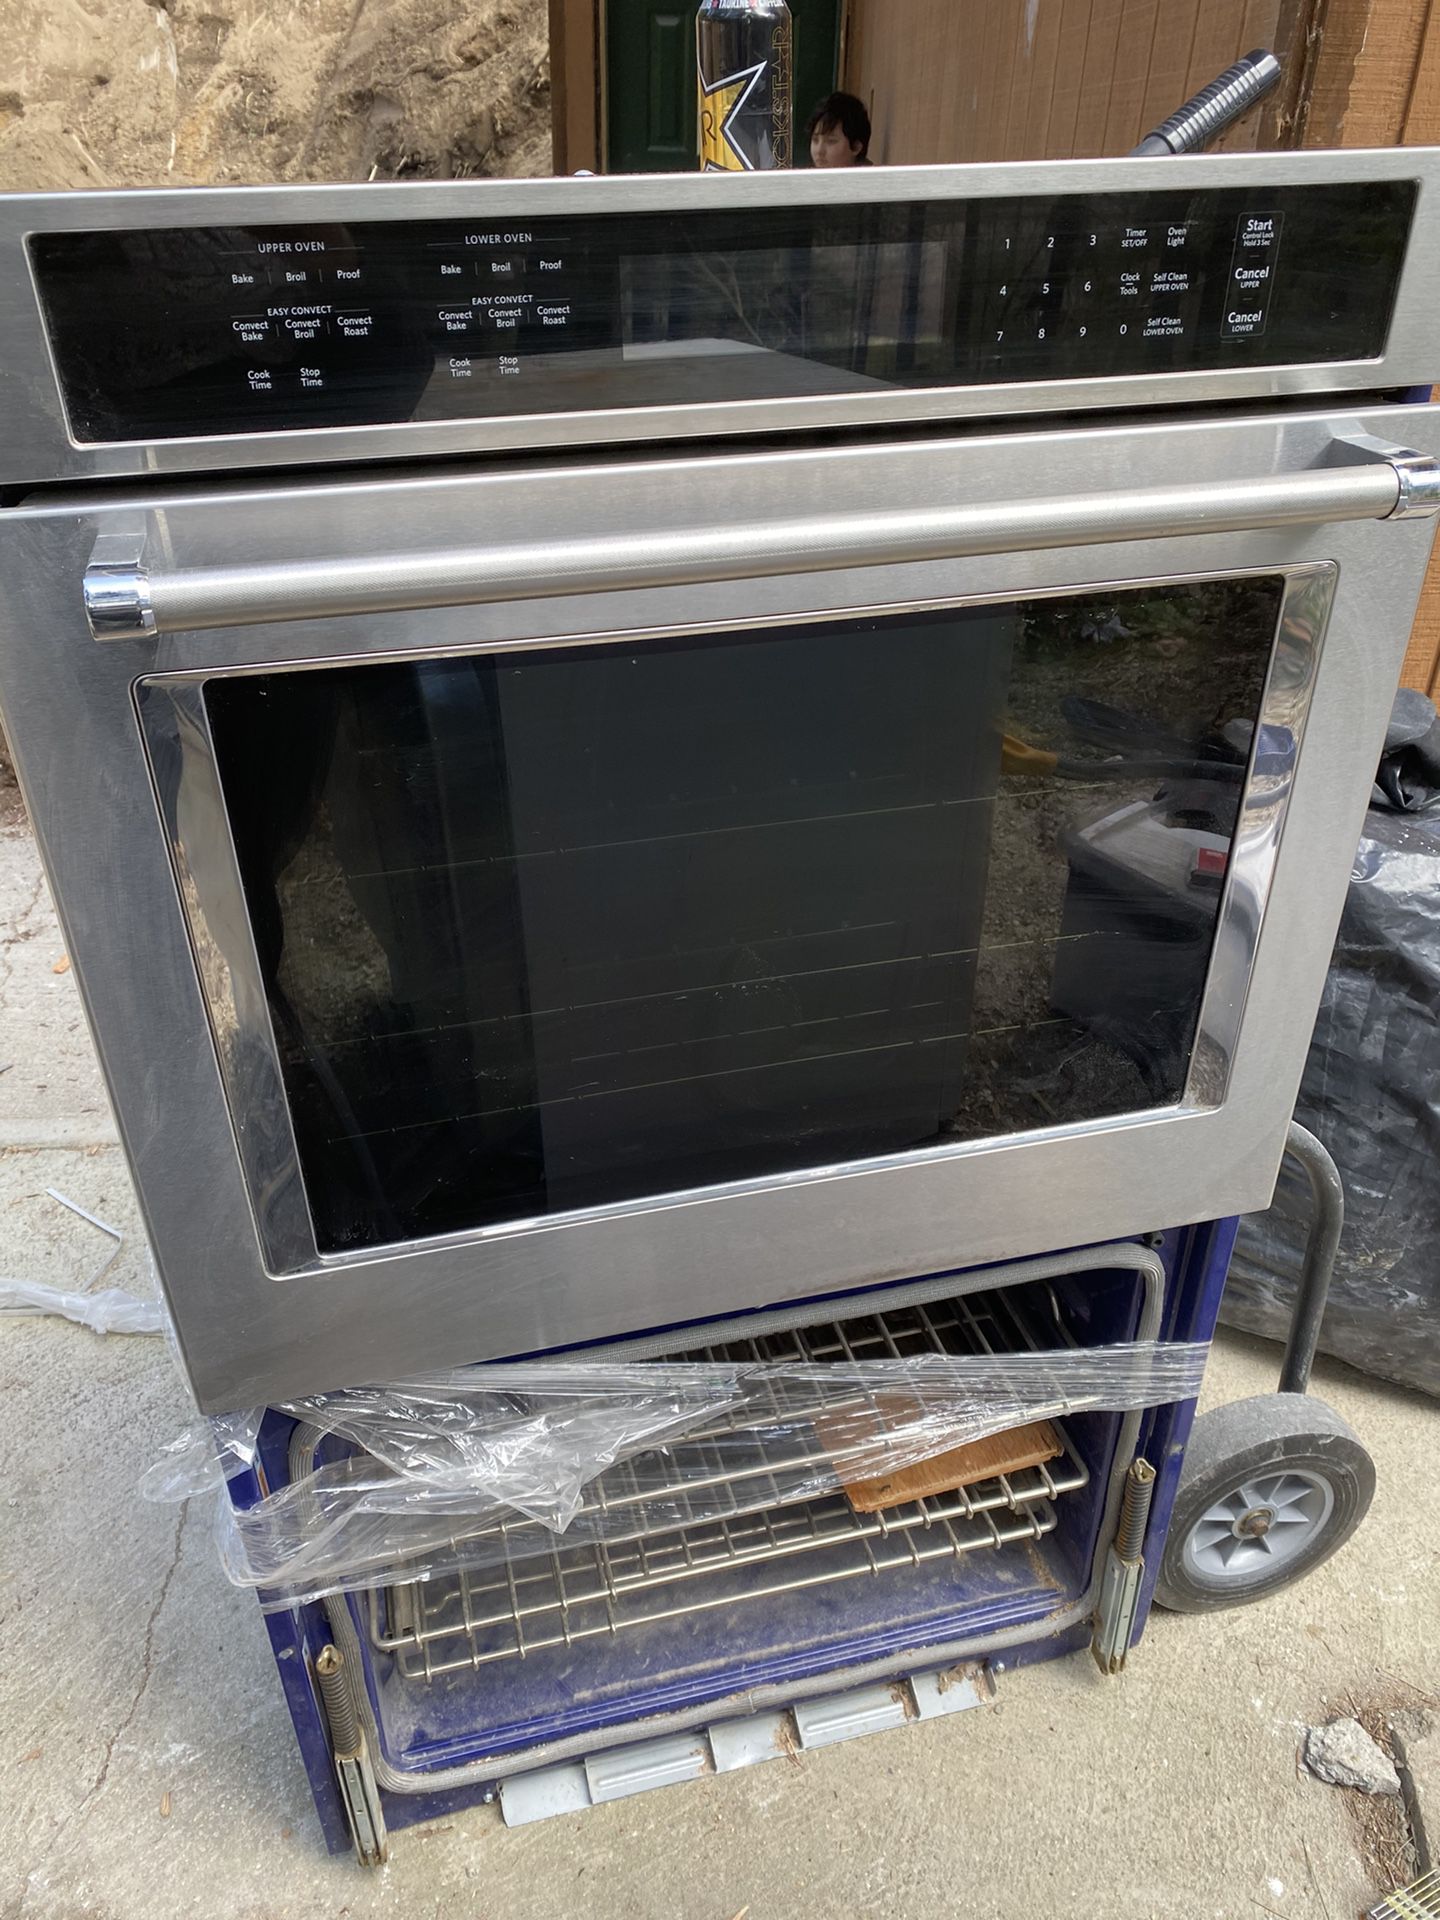 BRAND NEW KITCHEN AID DOUBLE OVEN